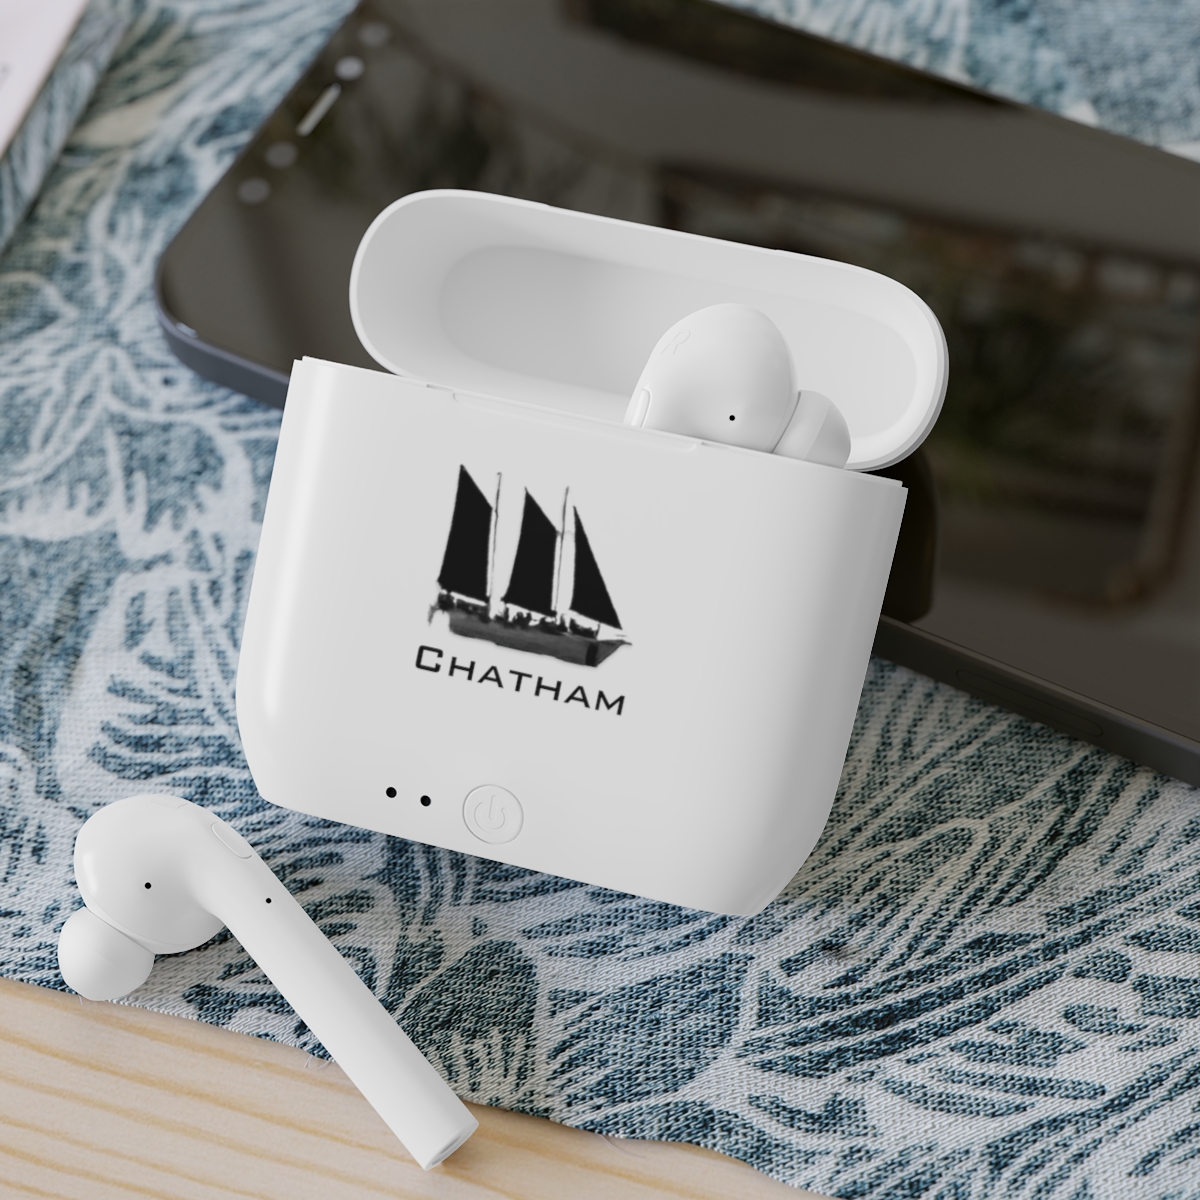 Dark Sails Chatham Wireless Earbuds product main image